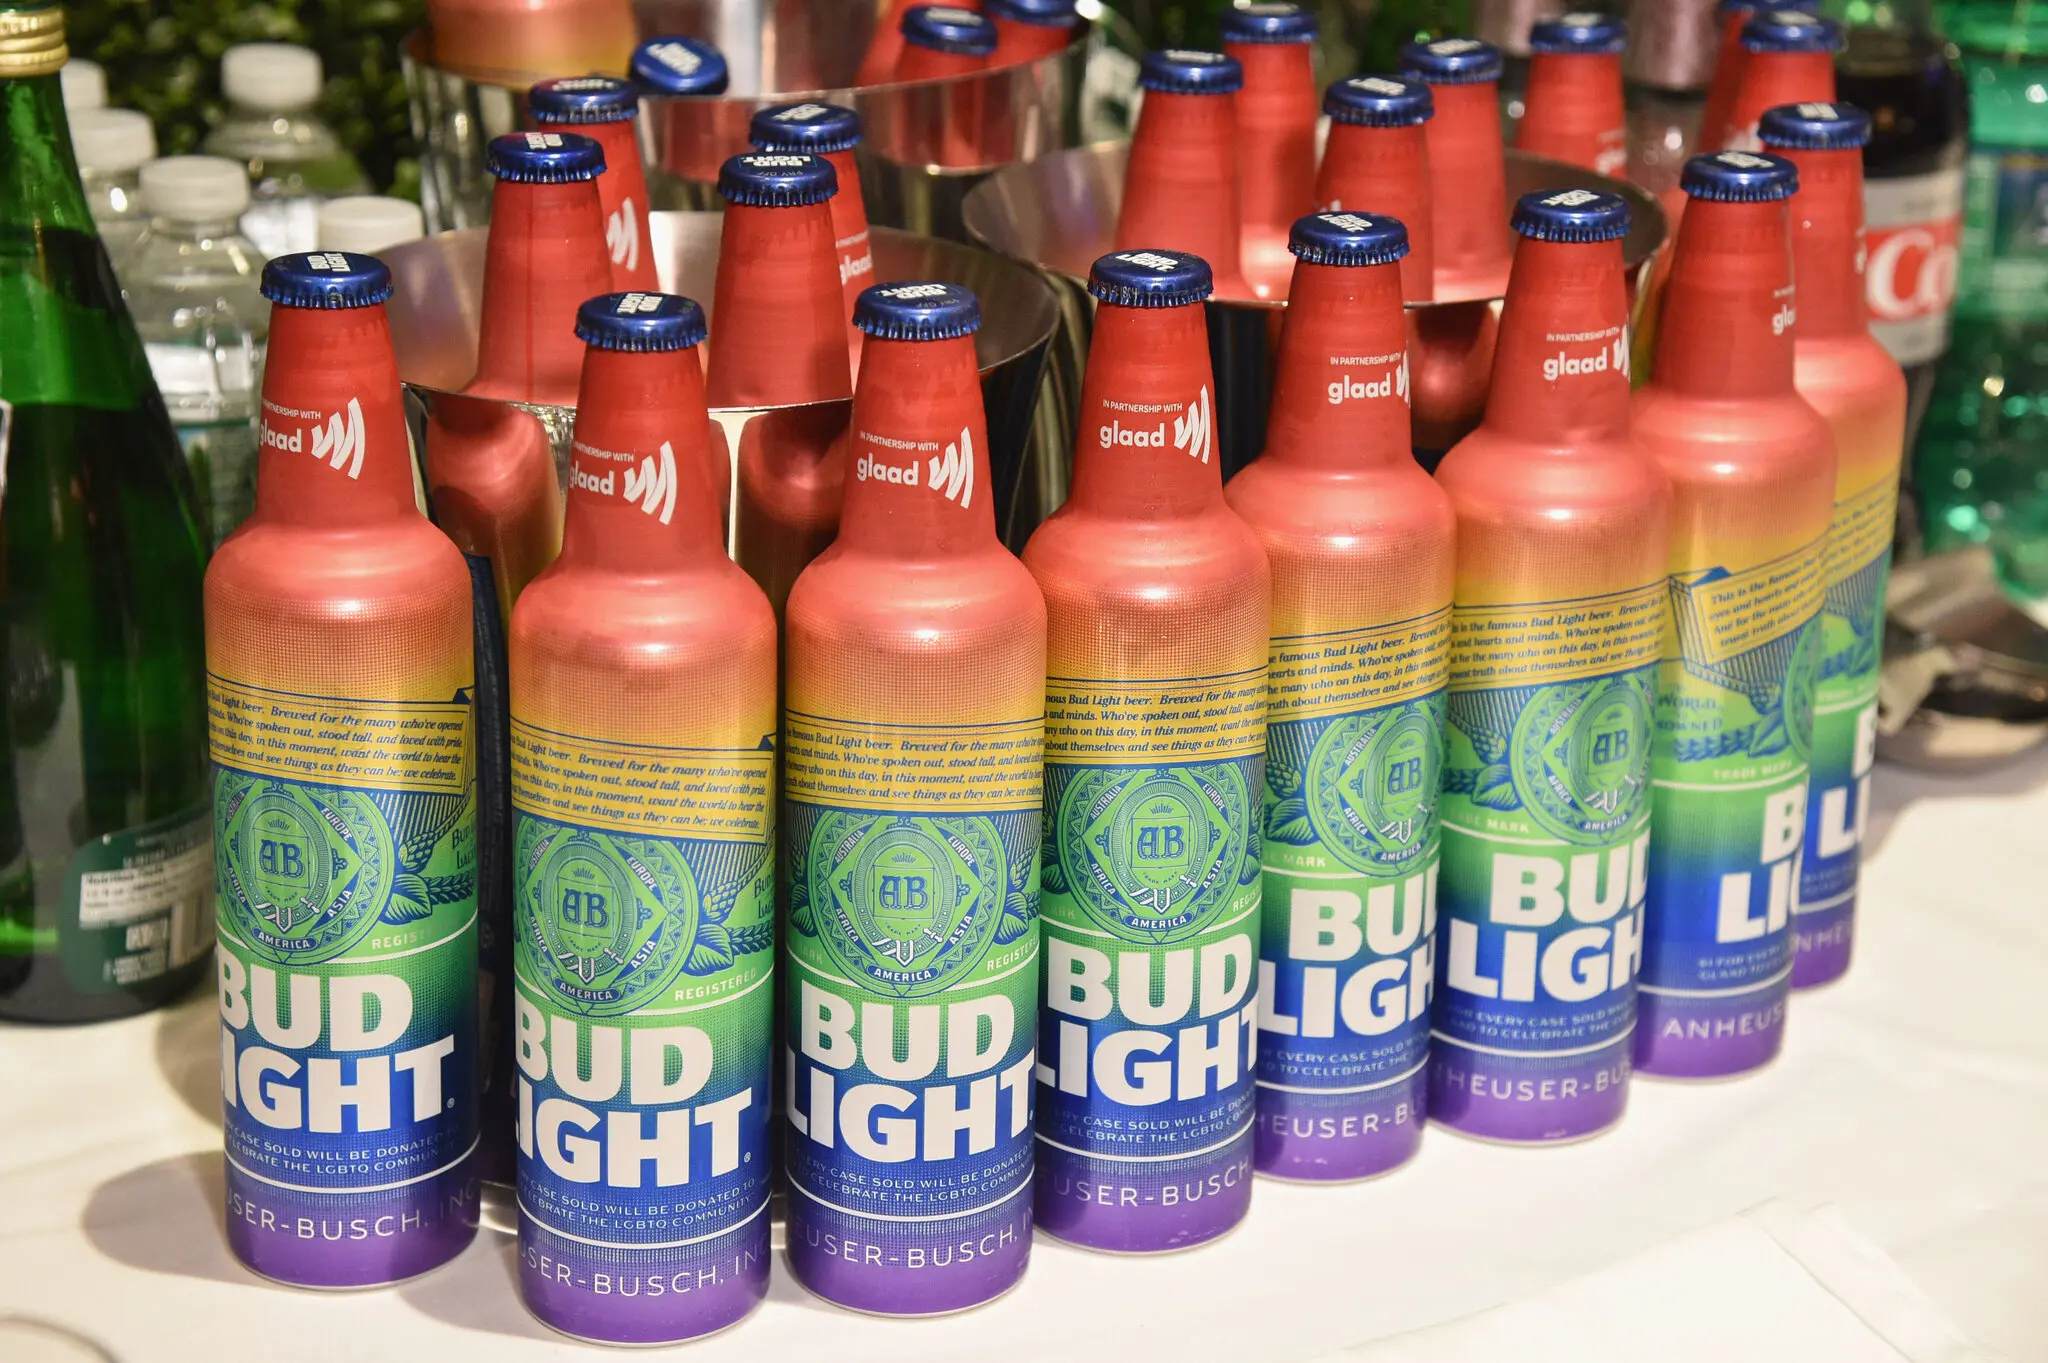 Do They Have Any Fans Left? ‘Extinct’ Bud Light Now Facing Second Boycott, But from Leftists This Time